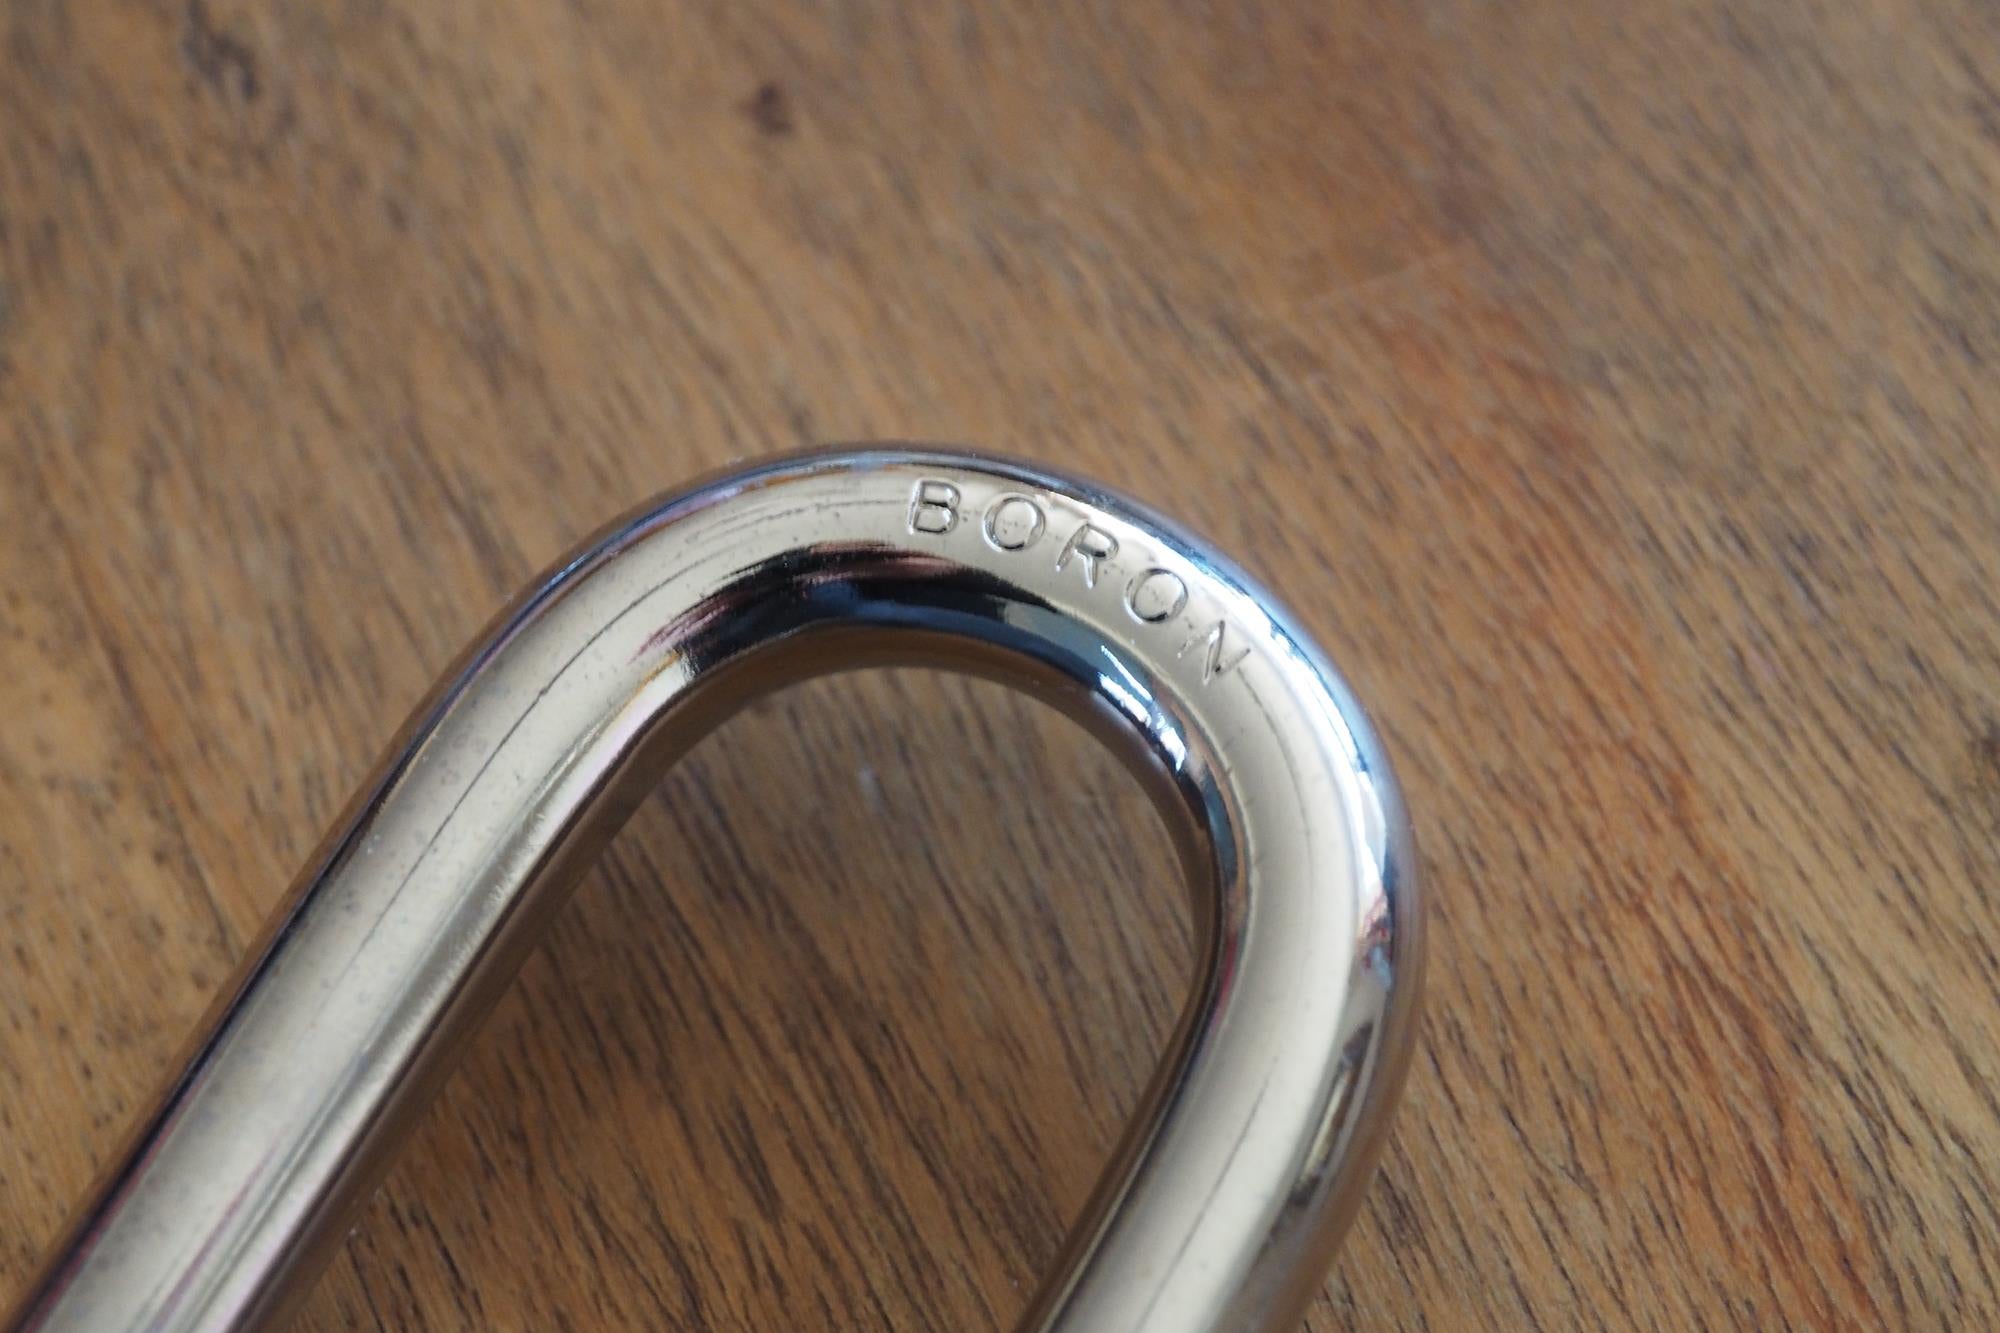 Master Lock Smart Outdoor Padlock secured to a wooden gate.Close-up of a padlock shackle with engraved word 